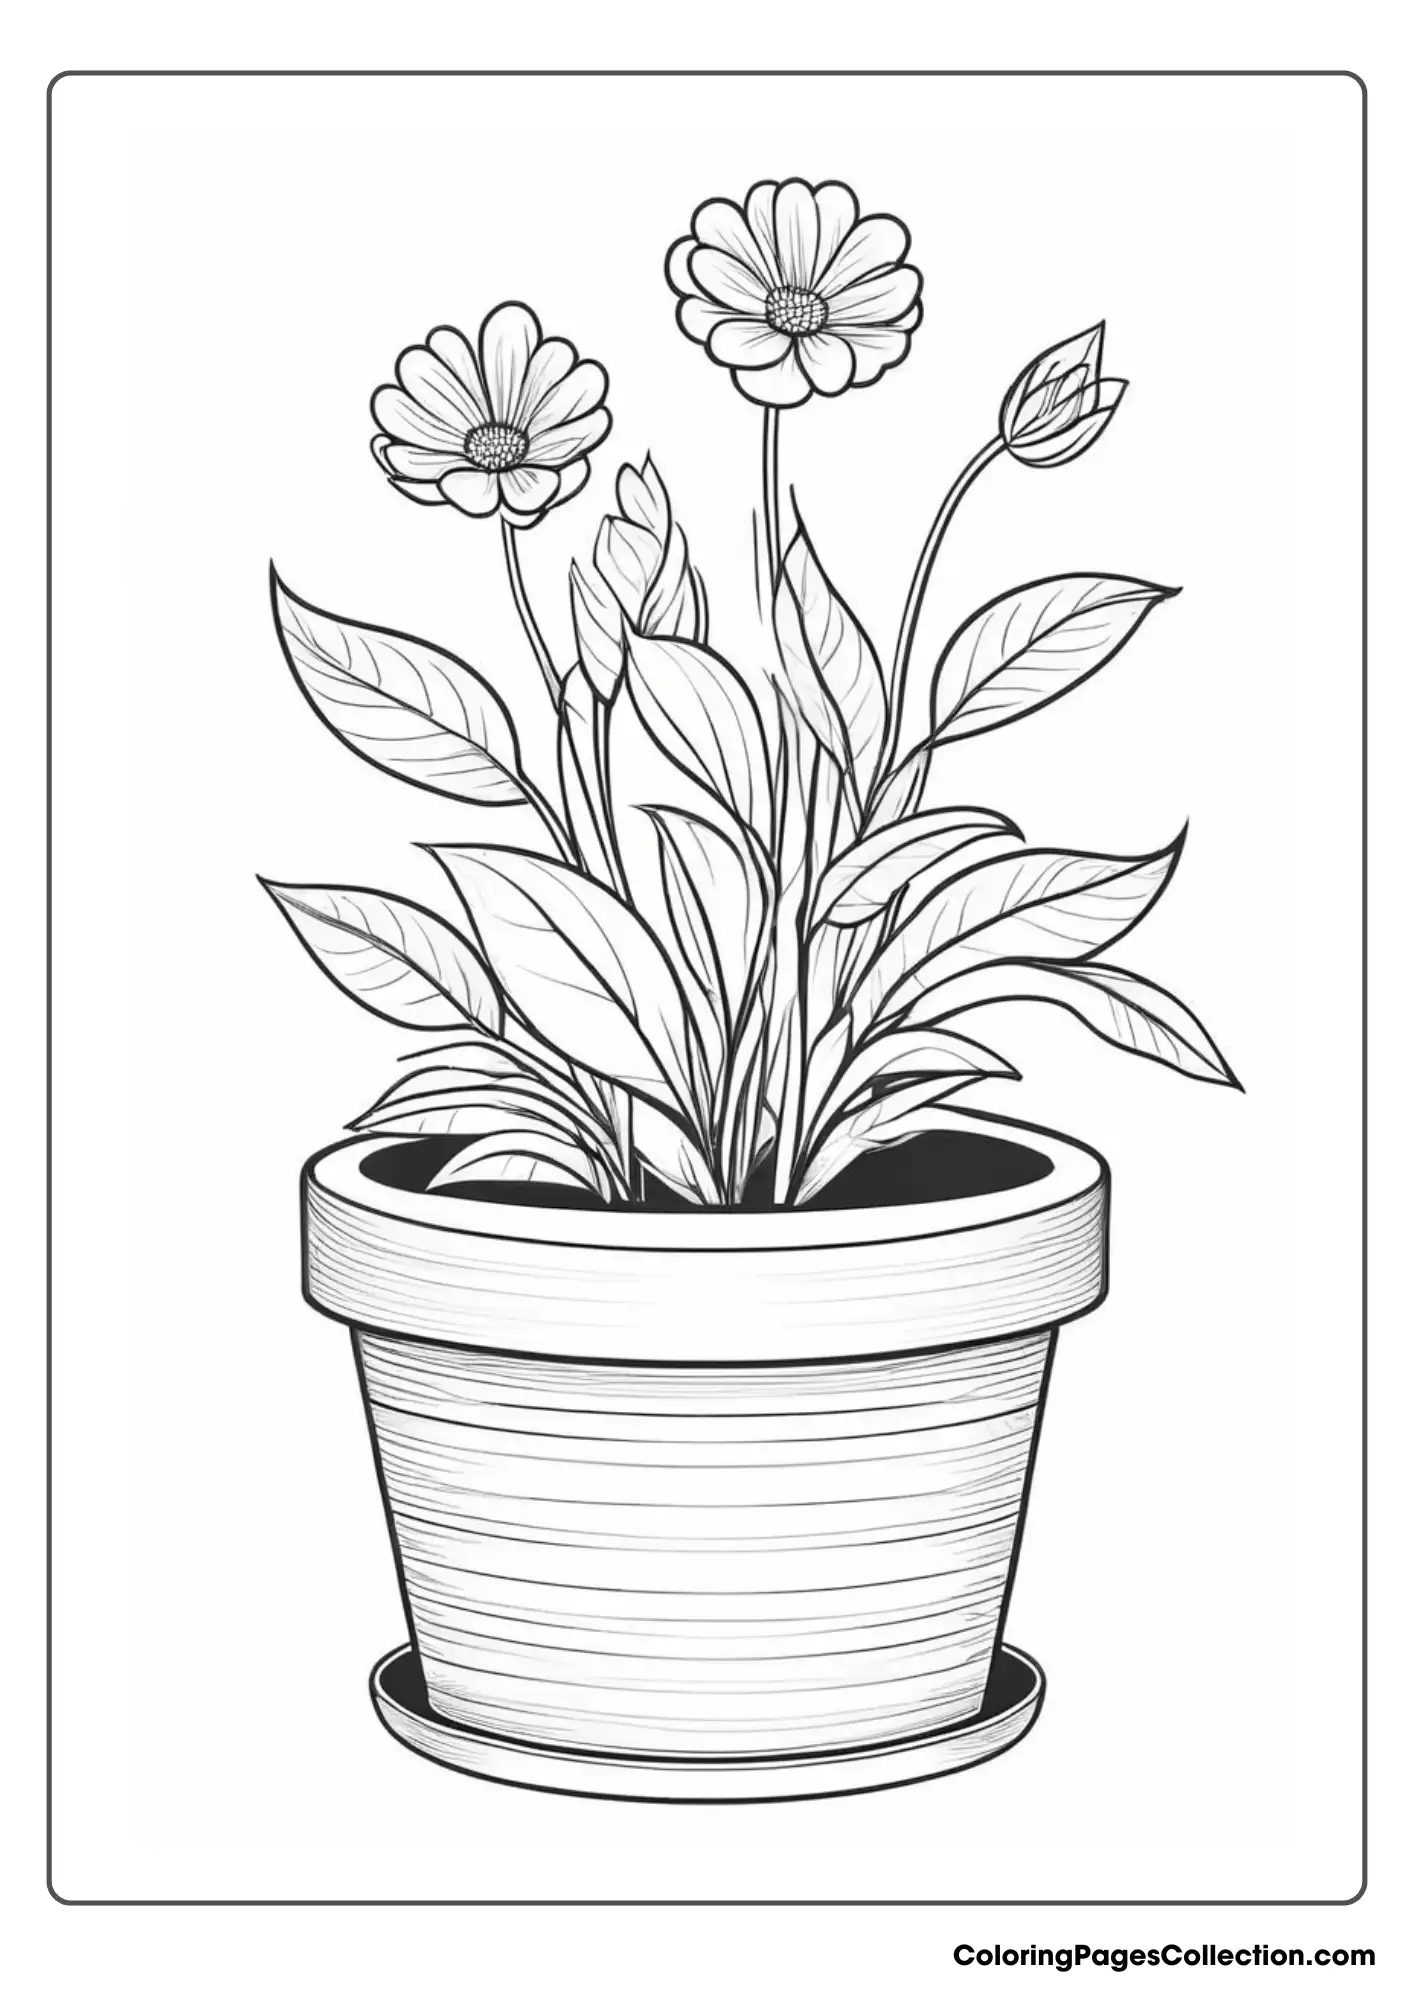 A Drawing Of A Flower Pot With Flowers In It